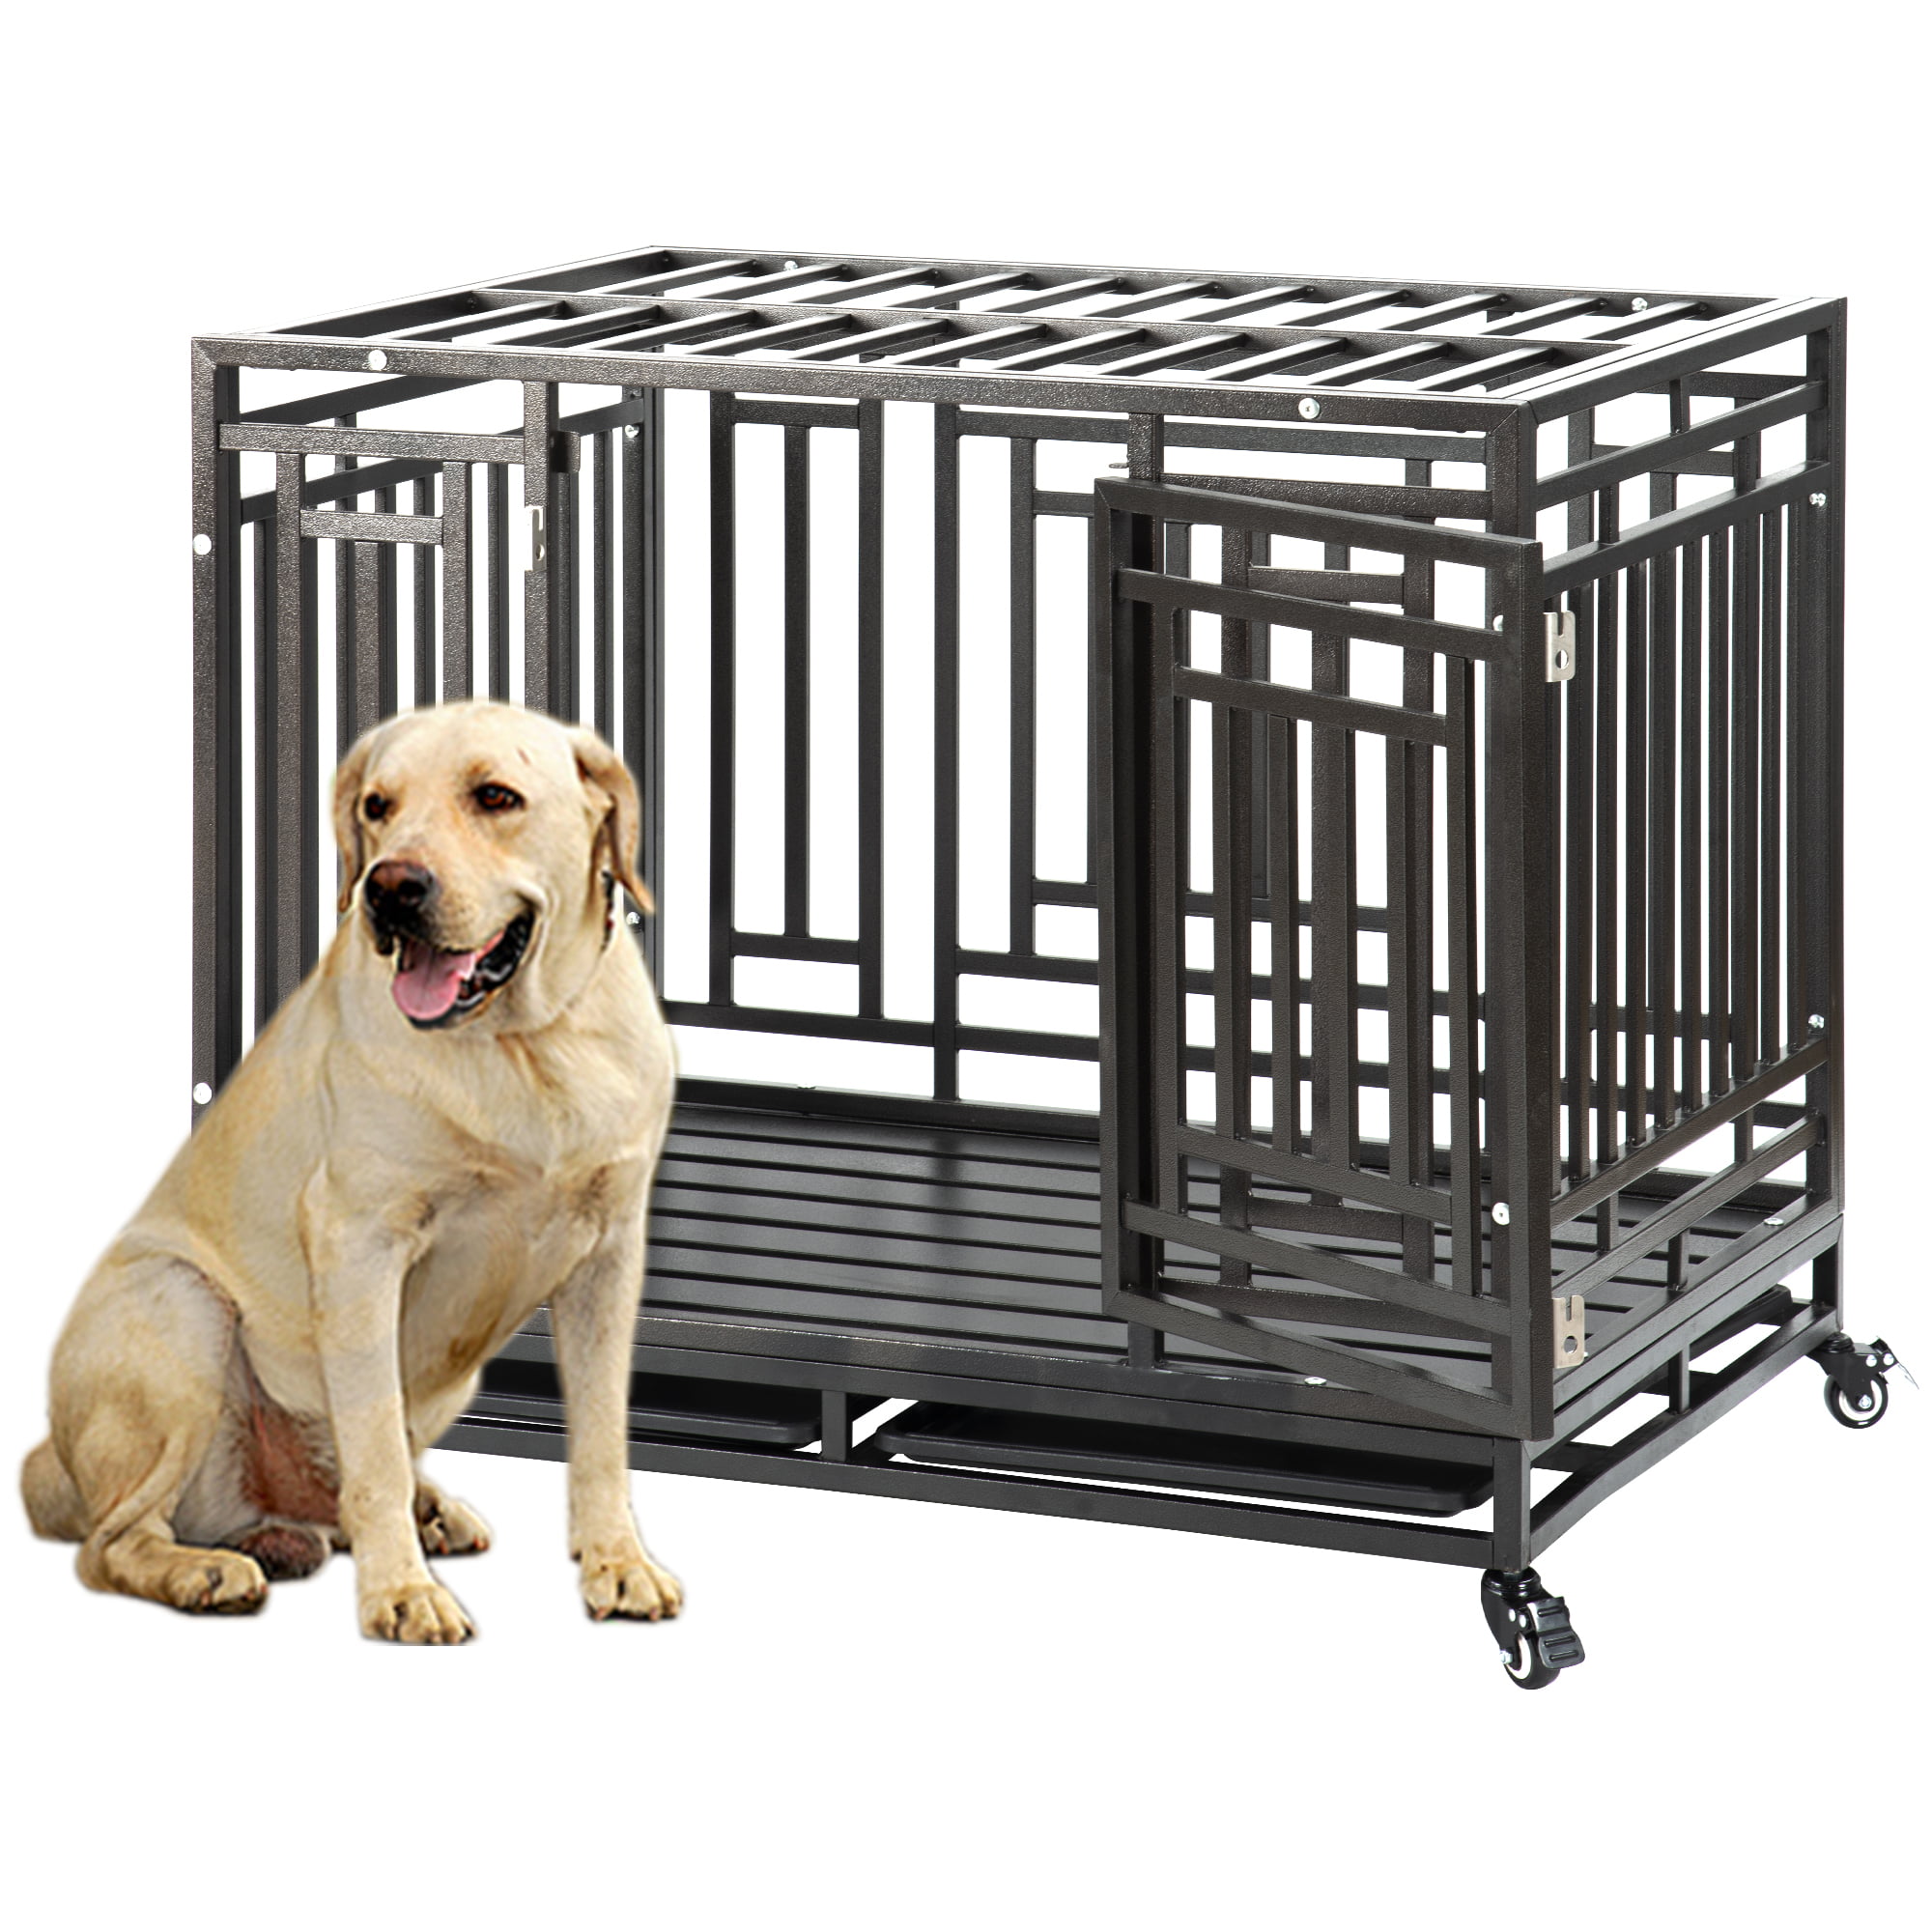 all dogs in the cage